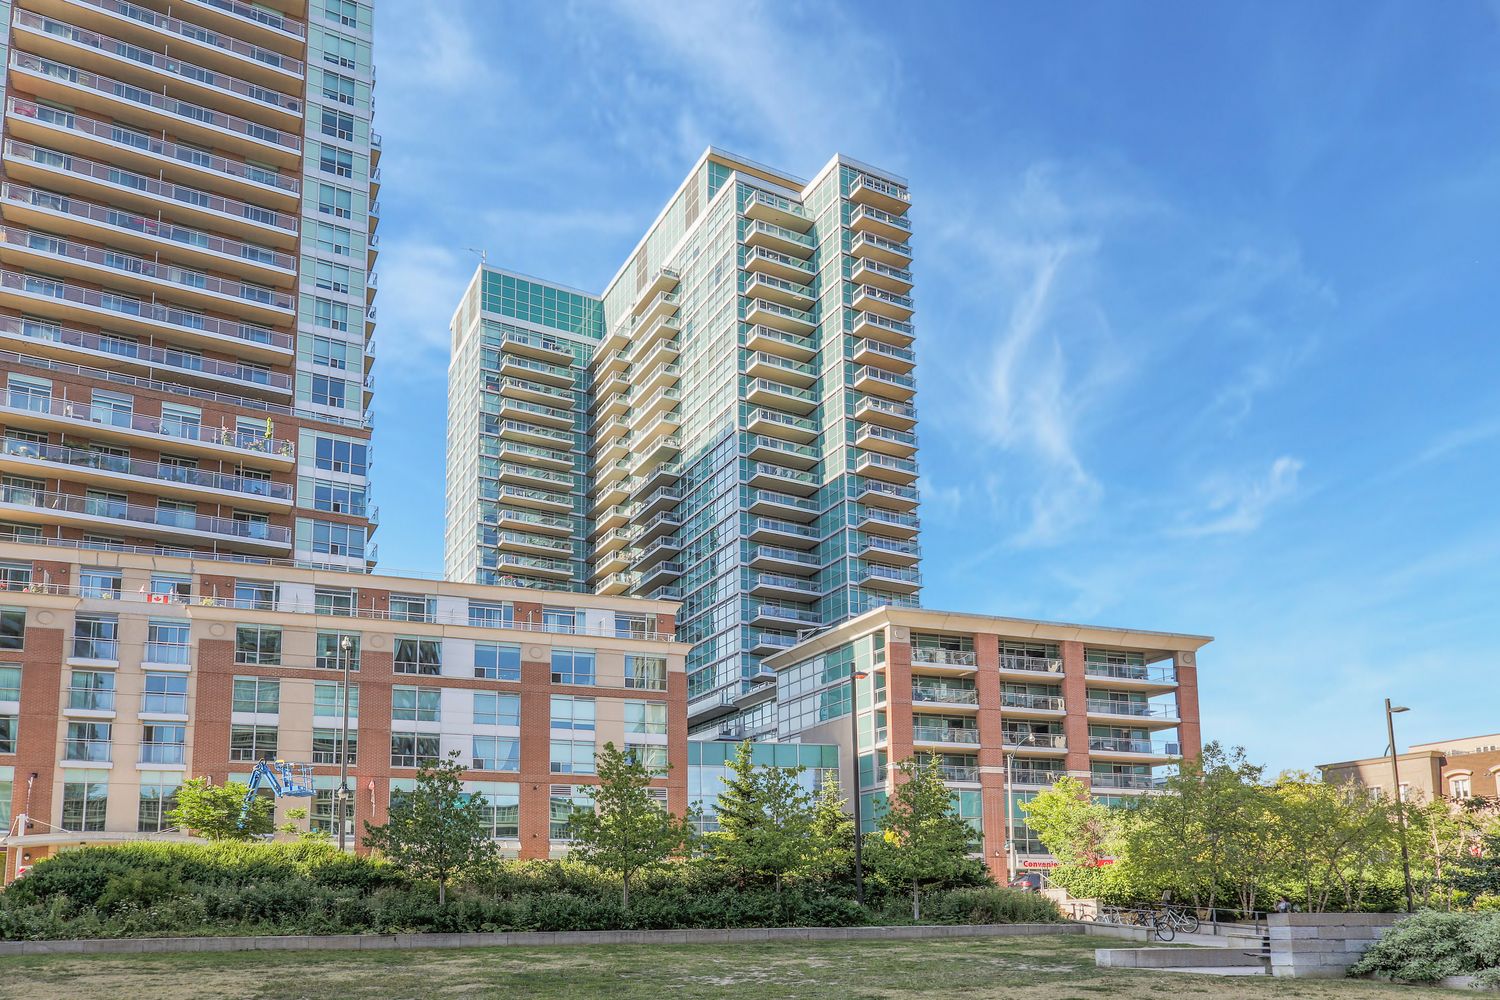 80 Western Battery Road. Zip Condos is located in  West End, Toronto - image #3 of 8